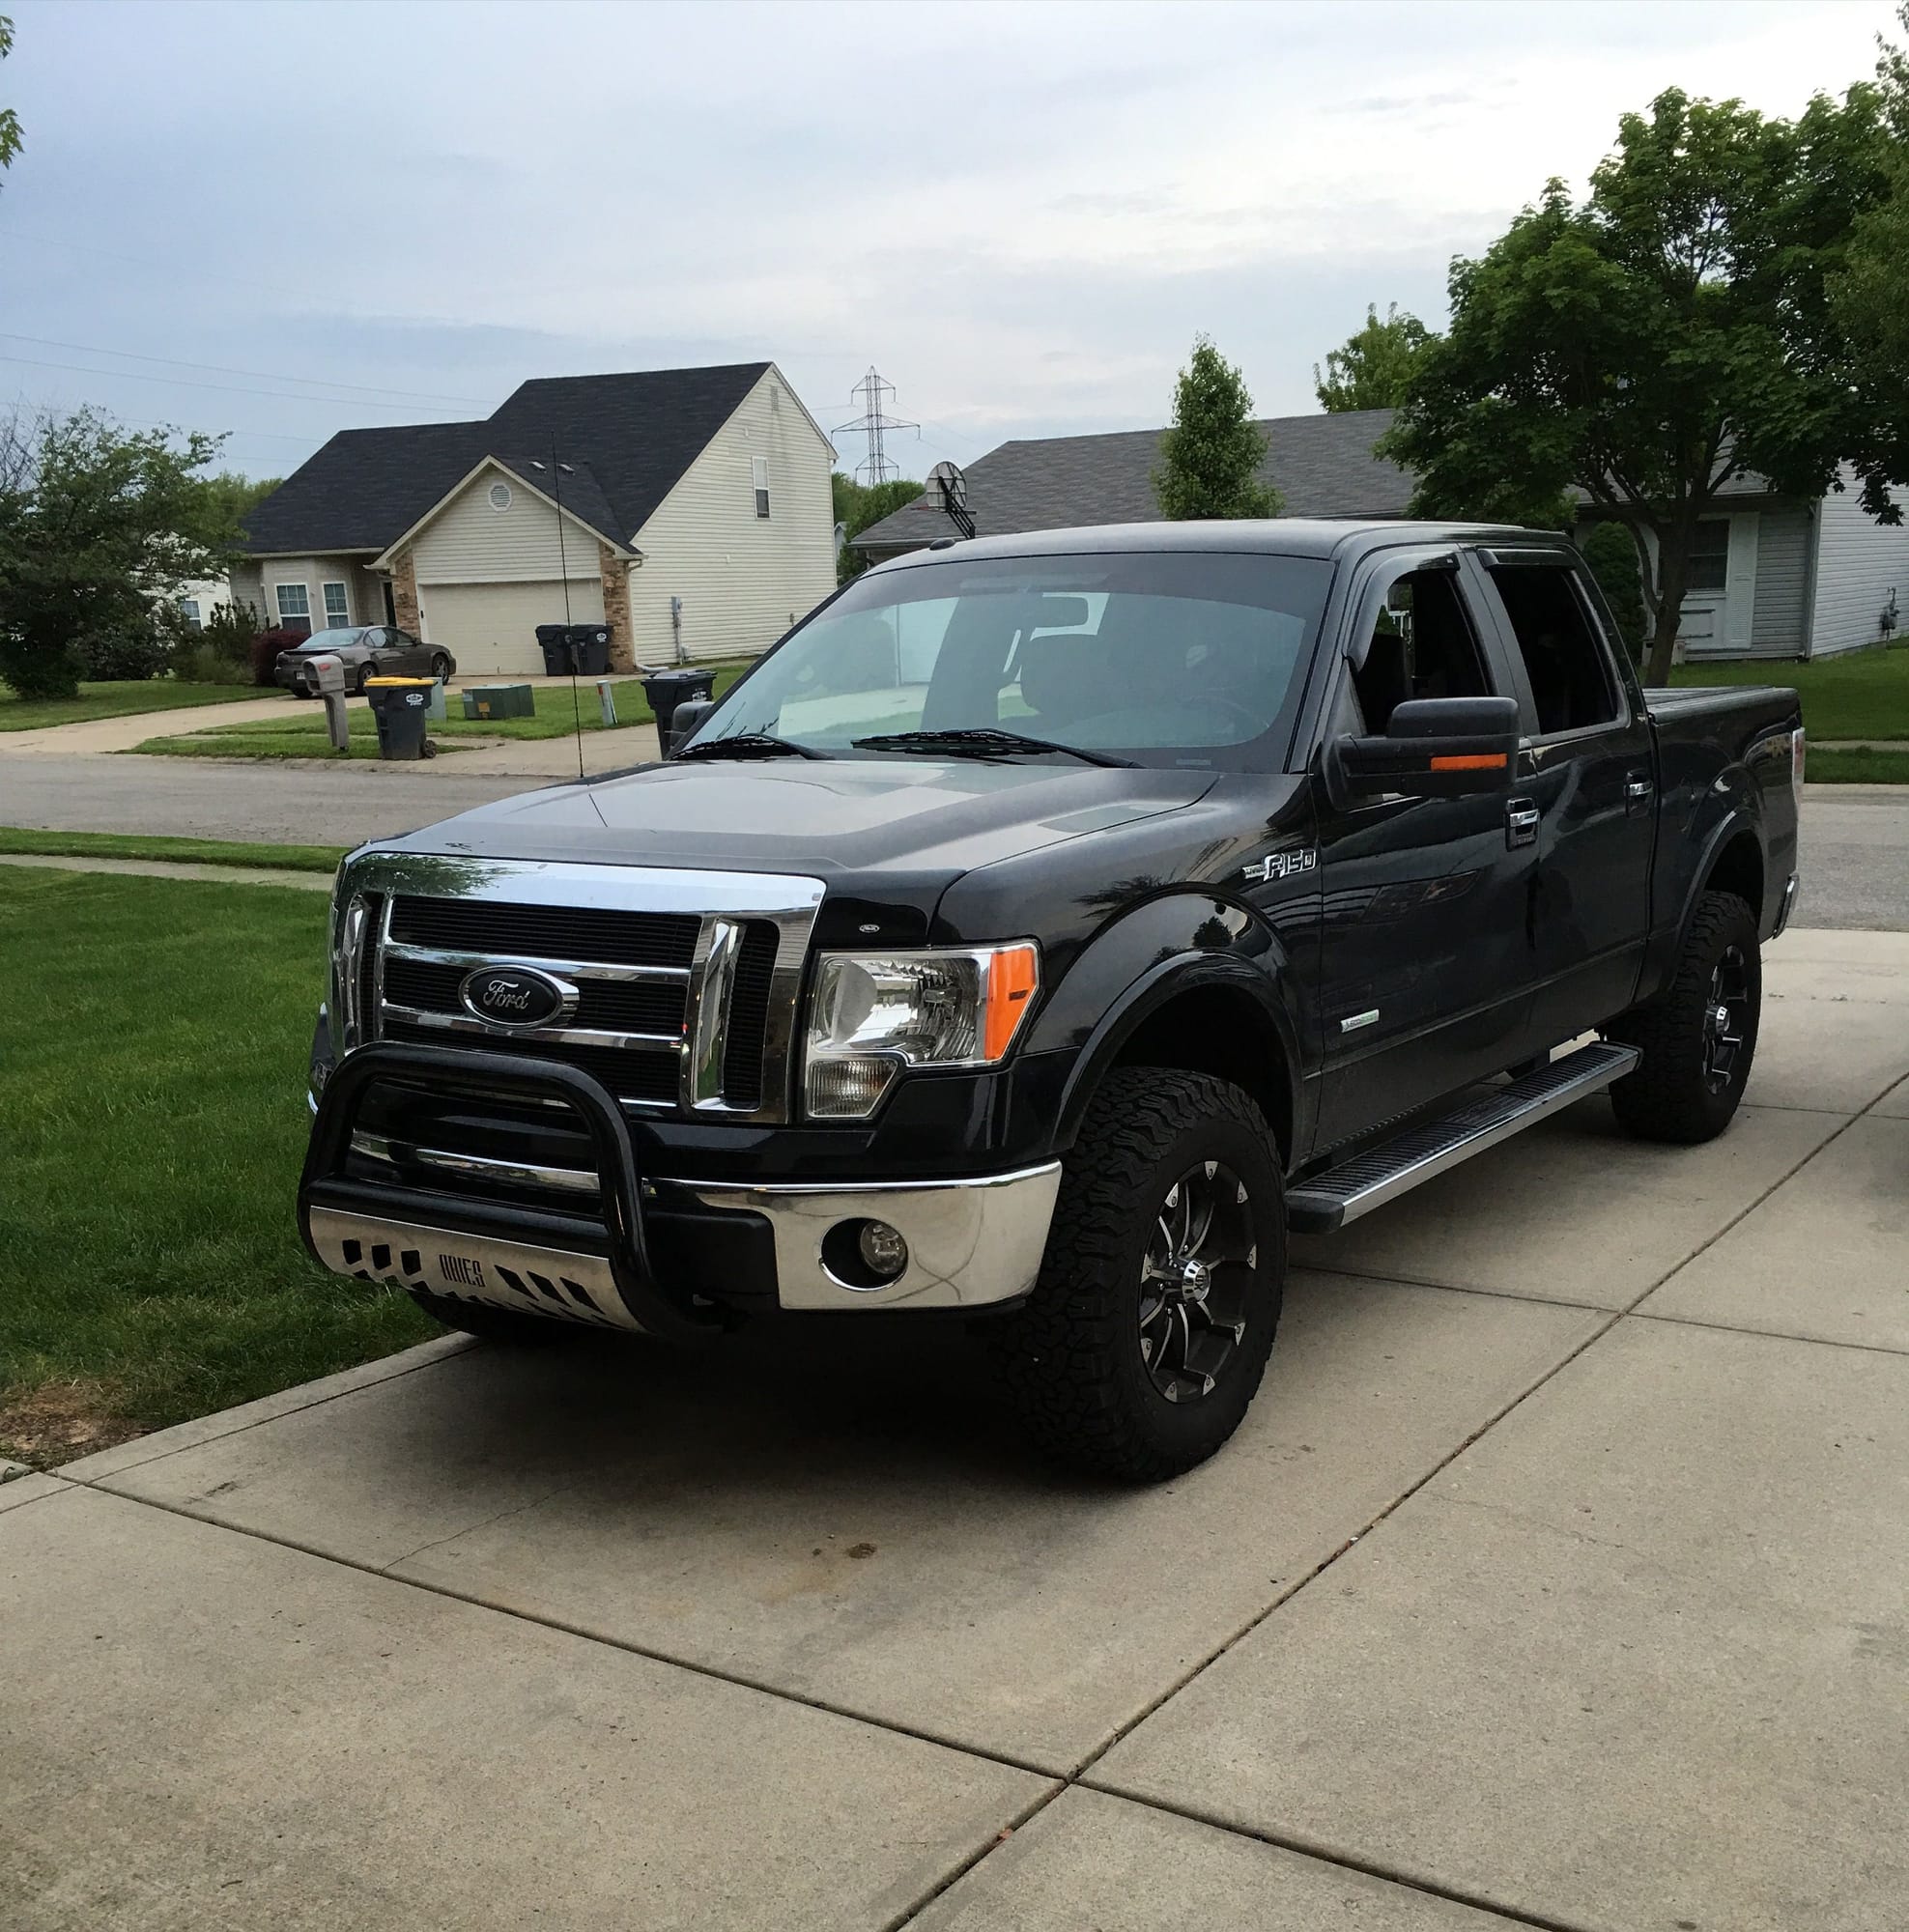 Wheel Spacers - Ford F150 Forum - Community of Ford Truck Fans